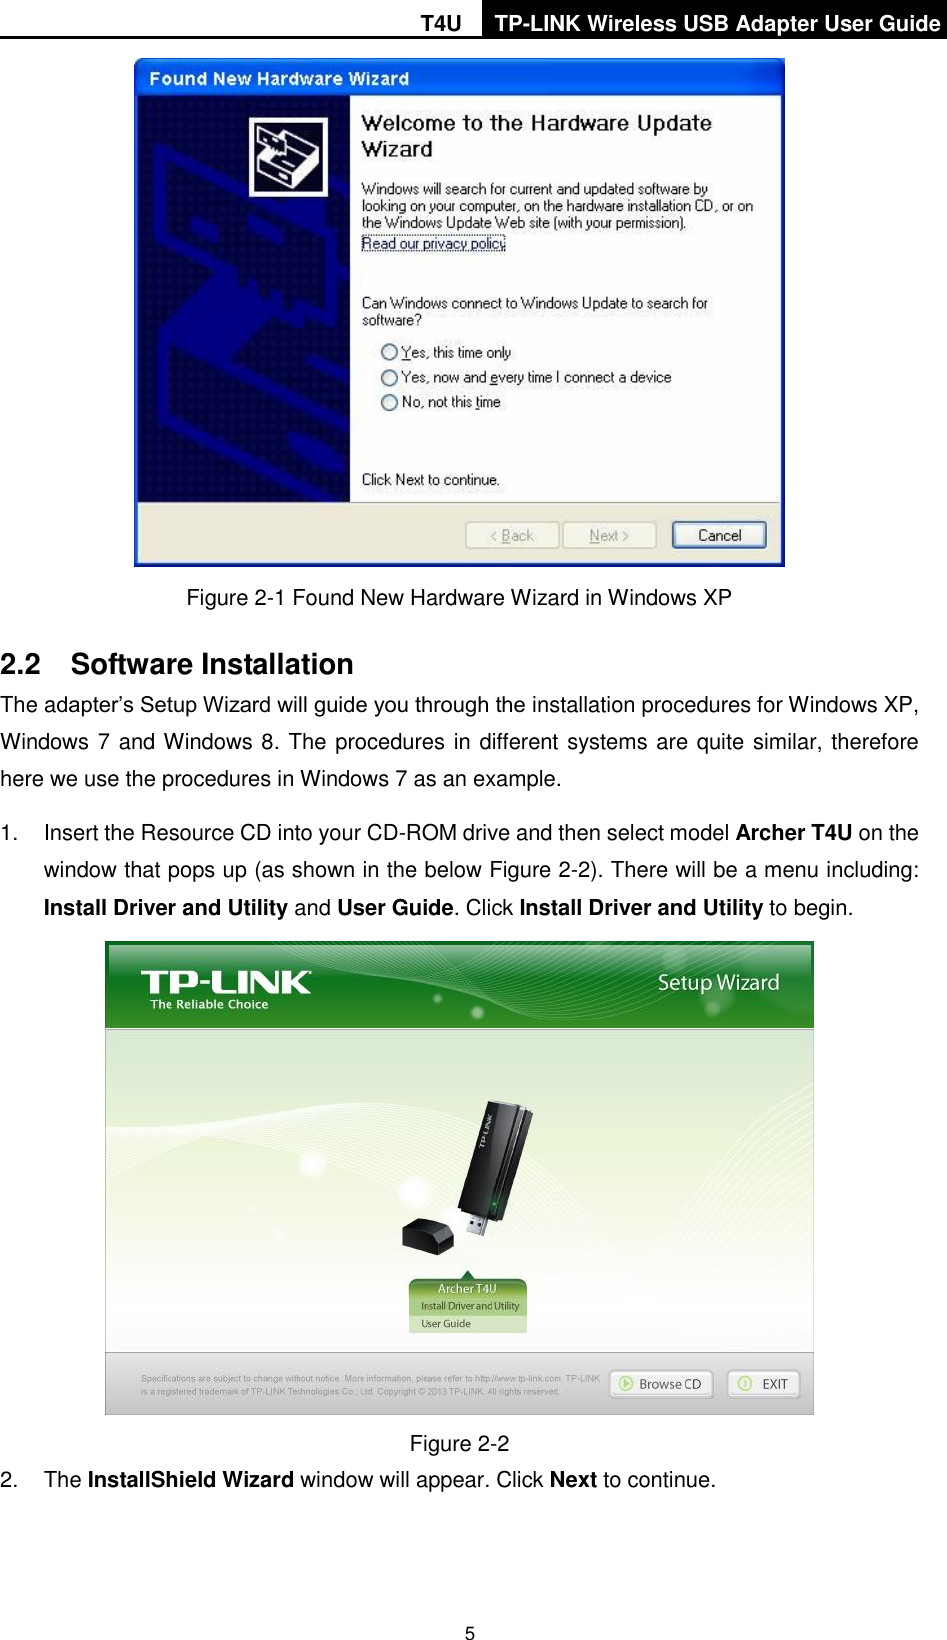 T4U TP-LINK Wireless USB Adapter User Guide   5  Figure 2-1 Found New Hardware Wizard in Windows XP 2.2  Software Installation The adapter’s Setup Wizard will guide you through the installation procedures for Windows XP, Windows 7 and Windows 8. The procedures in different systems are quite similar, therefore here we use the procedures in Windows 7 as an example.   1.  Insert the Resource CD into your CD-ROM drive and then select model Archer T4U on the window that pops up (as shown in the below Figure 2-2). There will be a menu including: Install Driver and Utility and User Guide. Click Install Driver and Utility to begin.   Figure 2-2 2.  The InstallShield Wizard window will appear. Click Next to continue. 